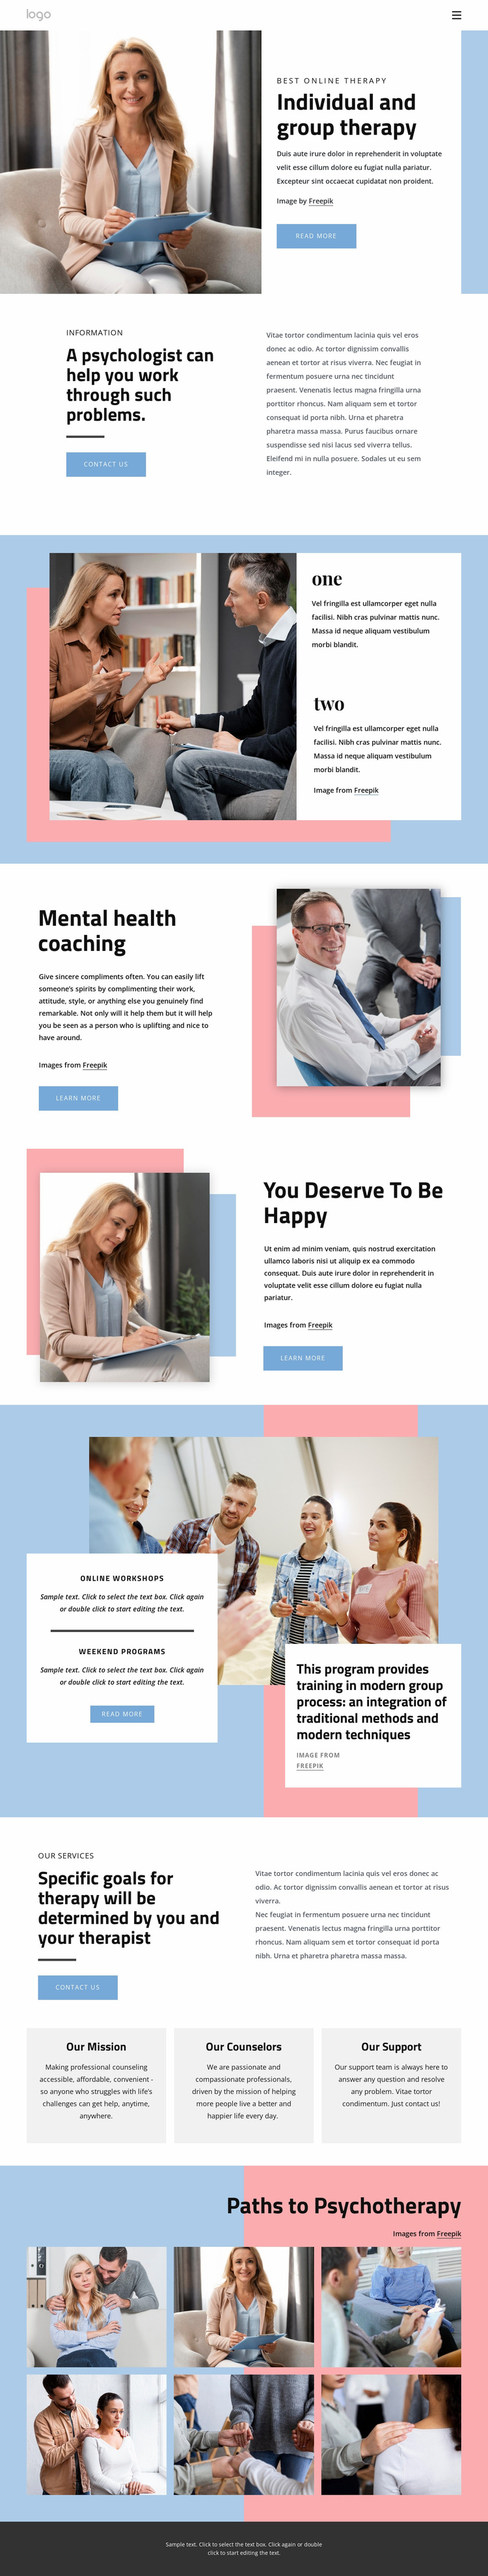 Undividual and group therapy Website Design